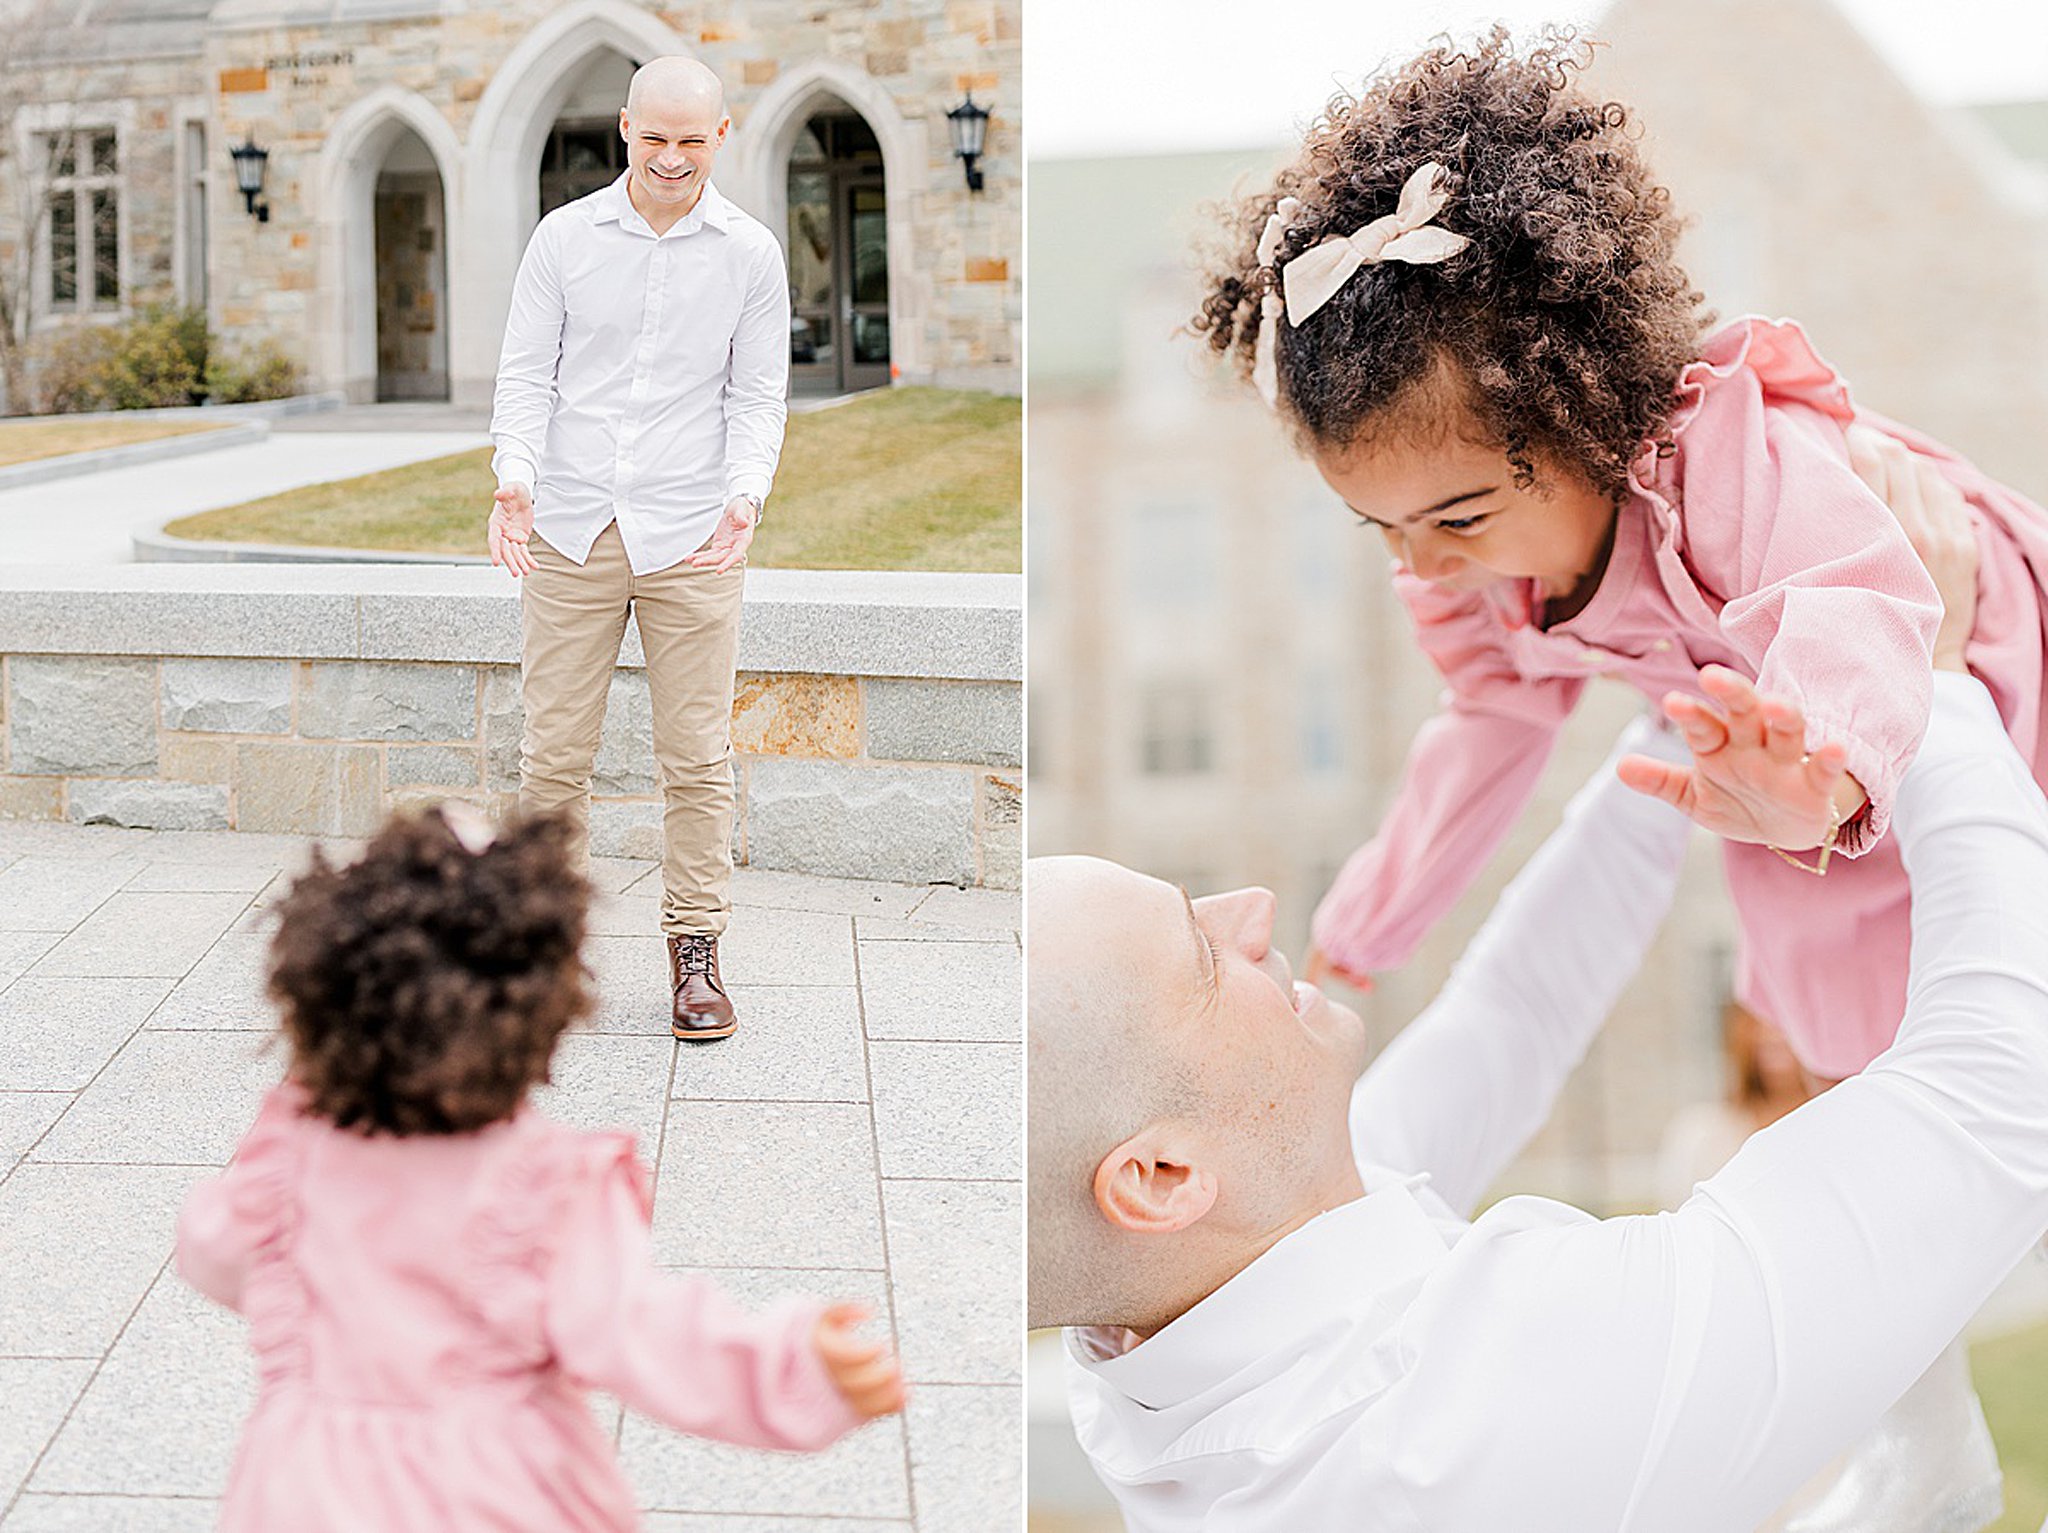 Dad plays with his young daughter wearing a pink dress in a park outside a large stone building harvard vanguard pediatrics